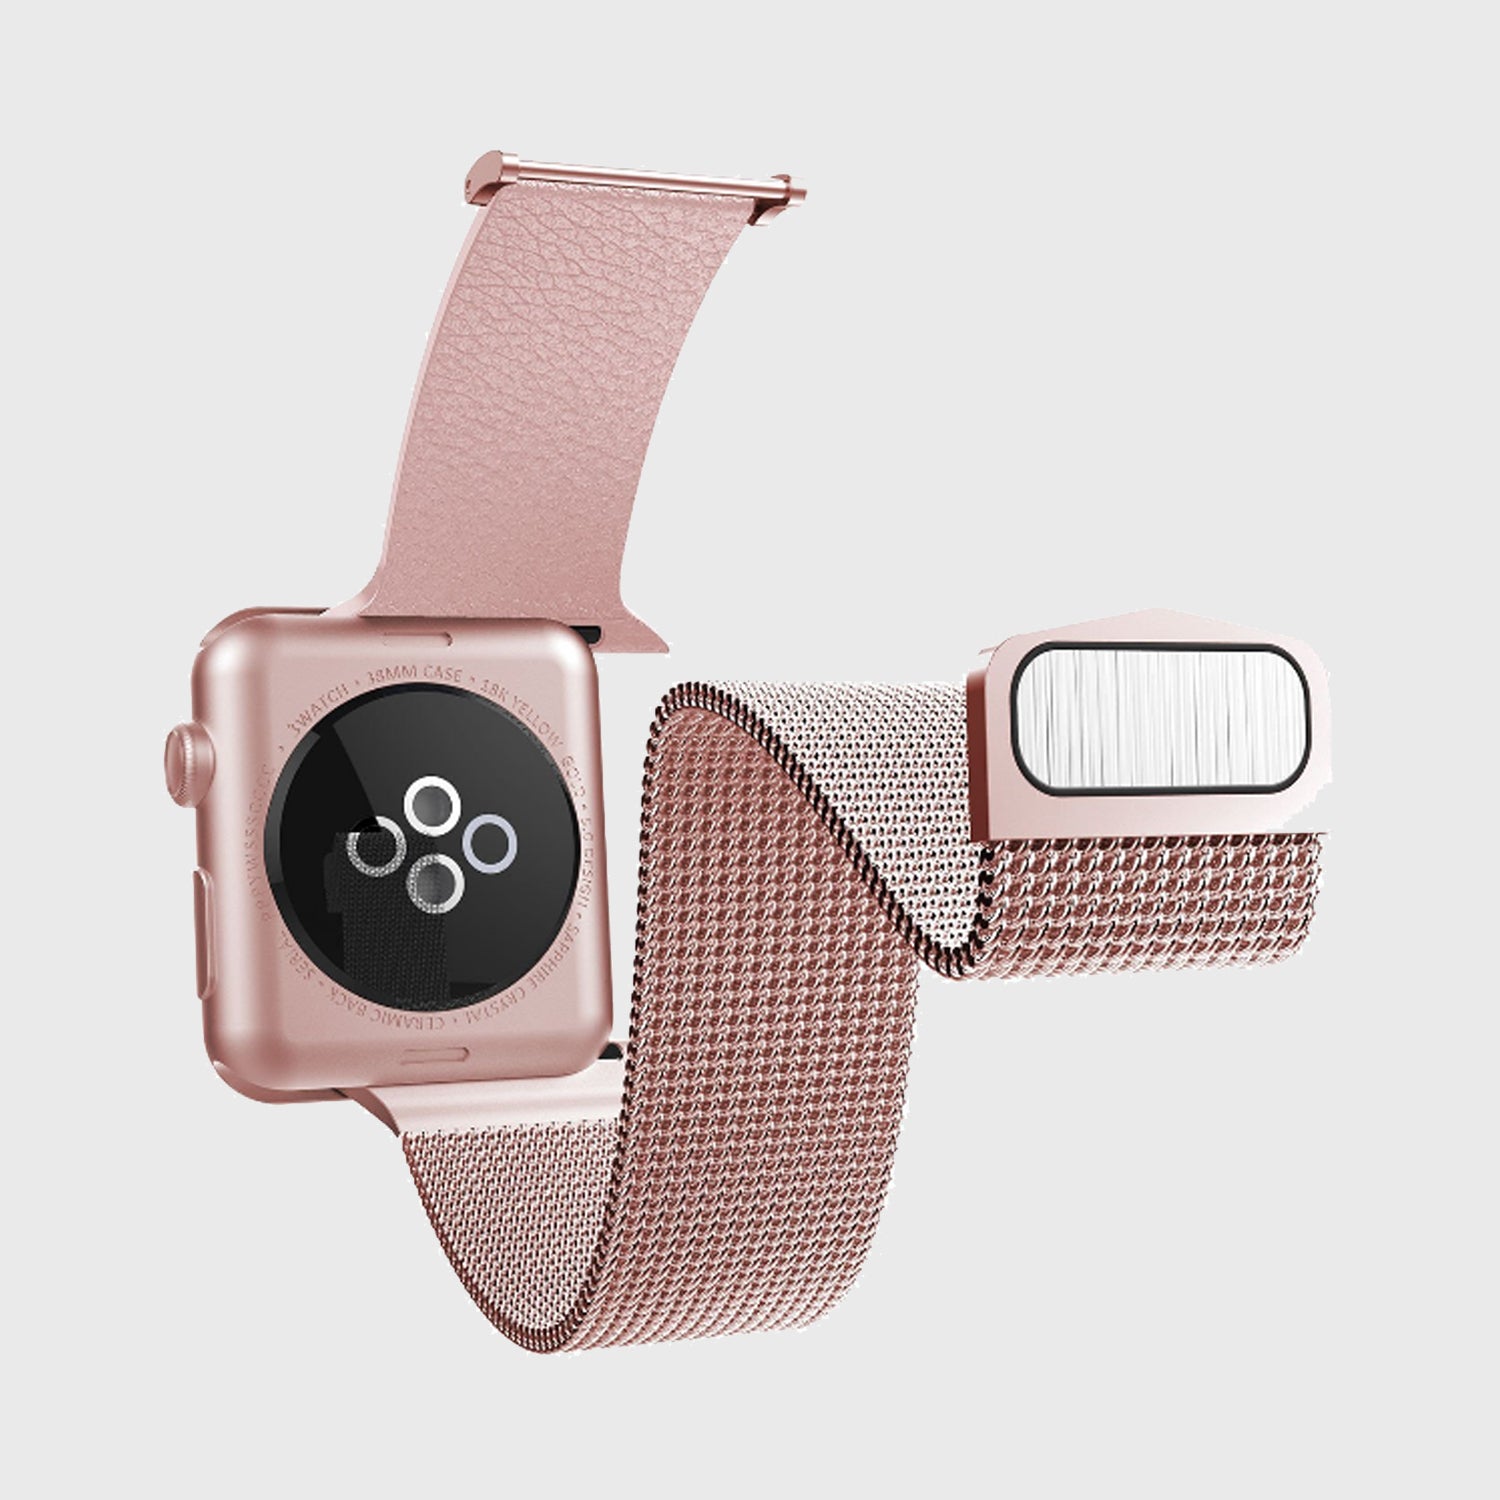 A rose gold Raptic Apple Watch with a stainless steel mesh band.